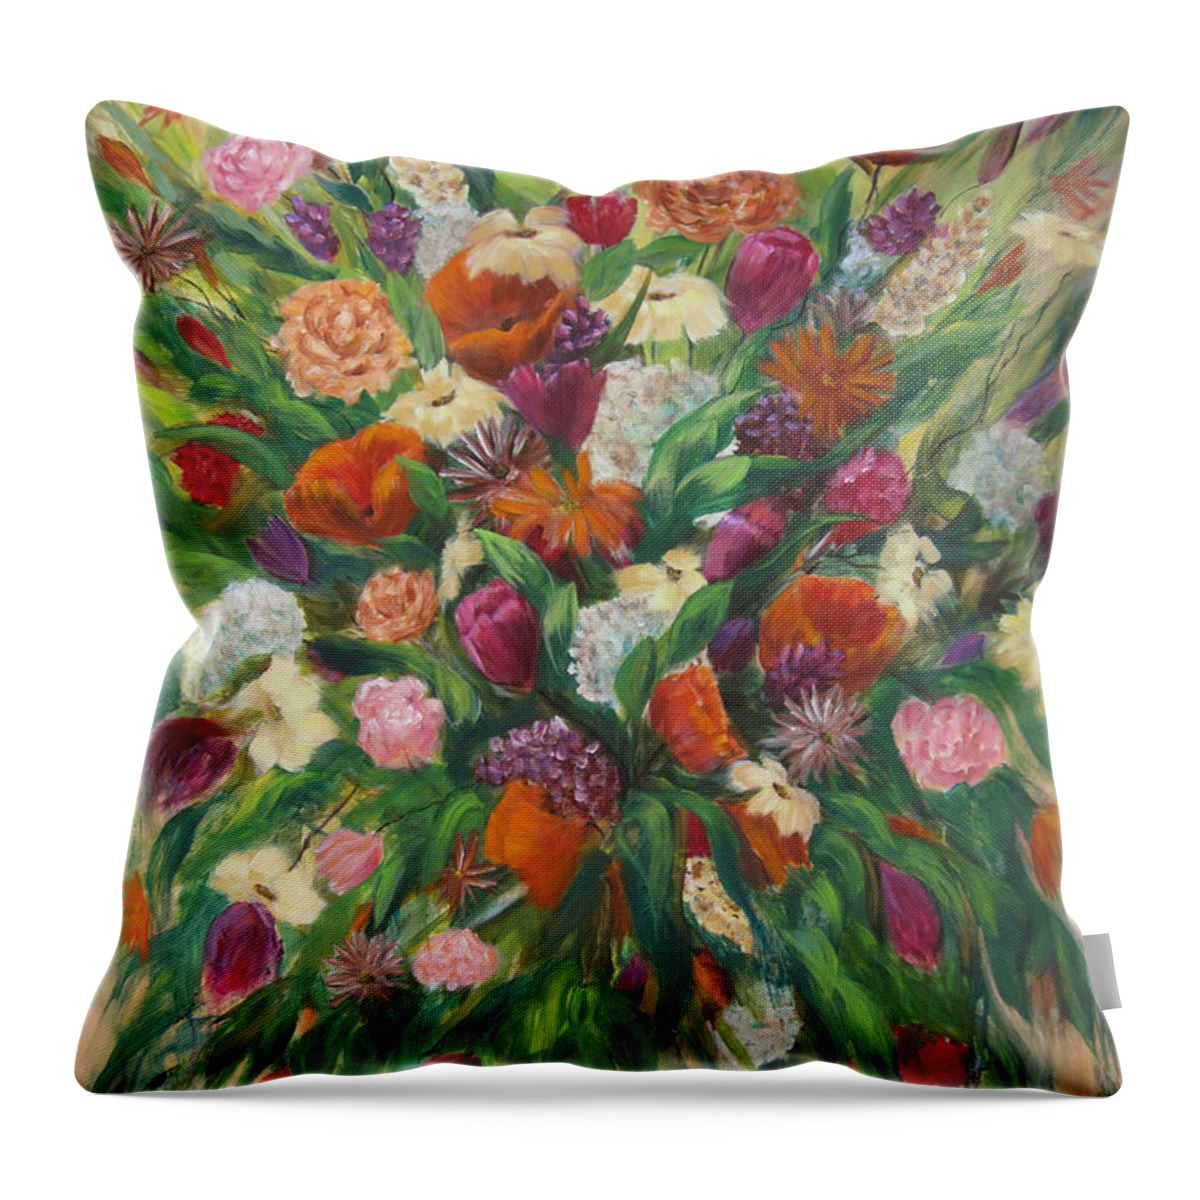 Flowers Throw Pillow featuring the painting Forever In Bloom by Roberta Rotunda